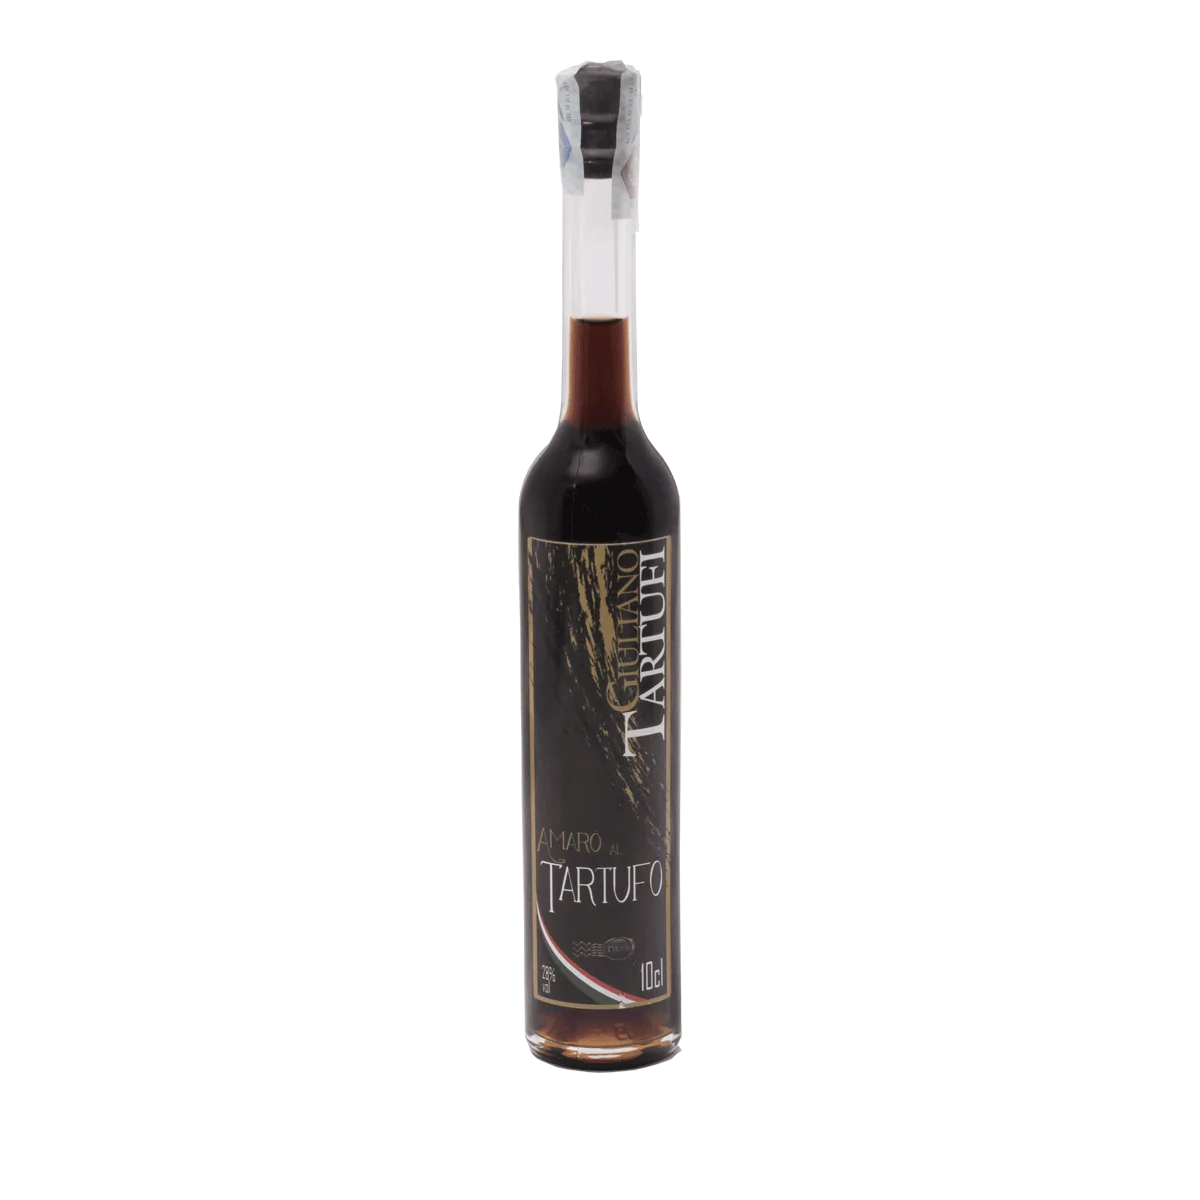 Italian herbal liqueur refined with truffle infusion